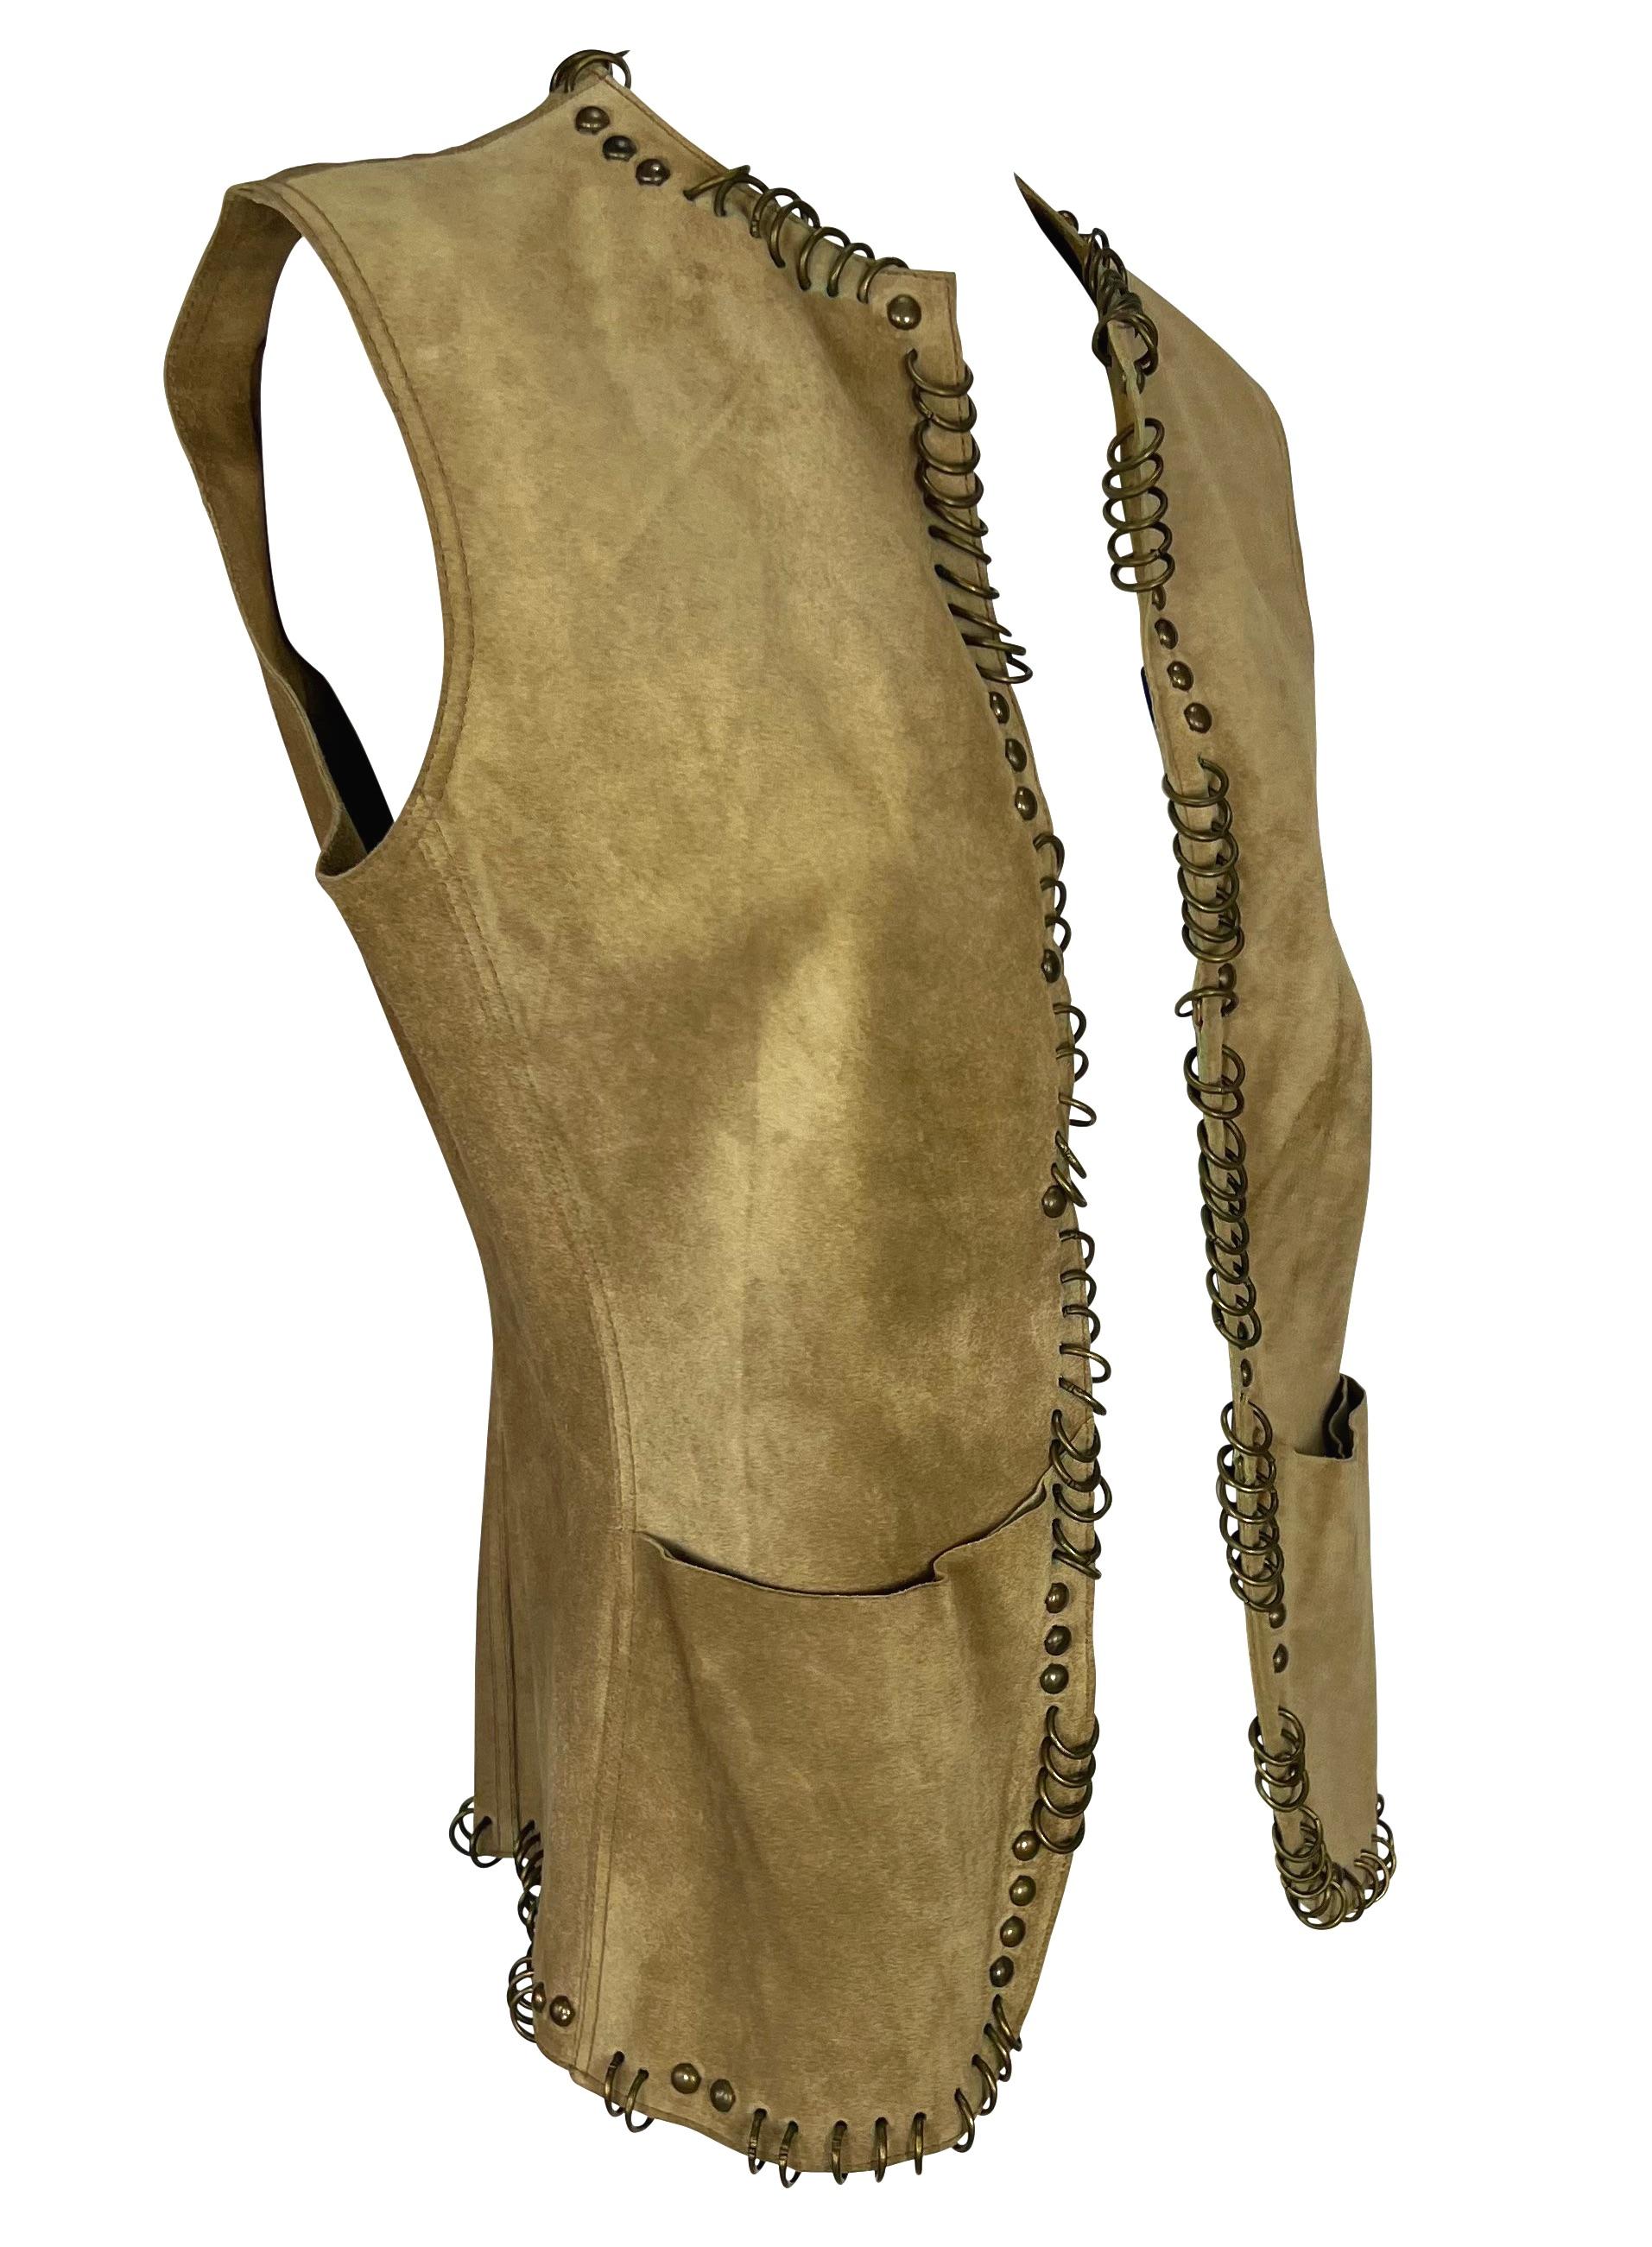 S/S 2002 Yves Saint Laurent by Tom Ford Safari Distressed Suede Studded Vest For Sale 4